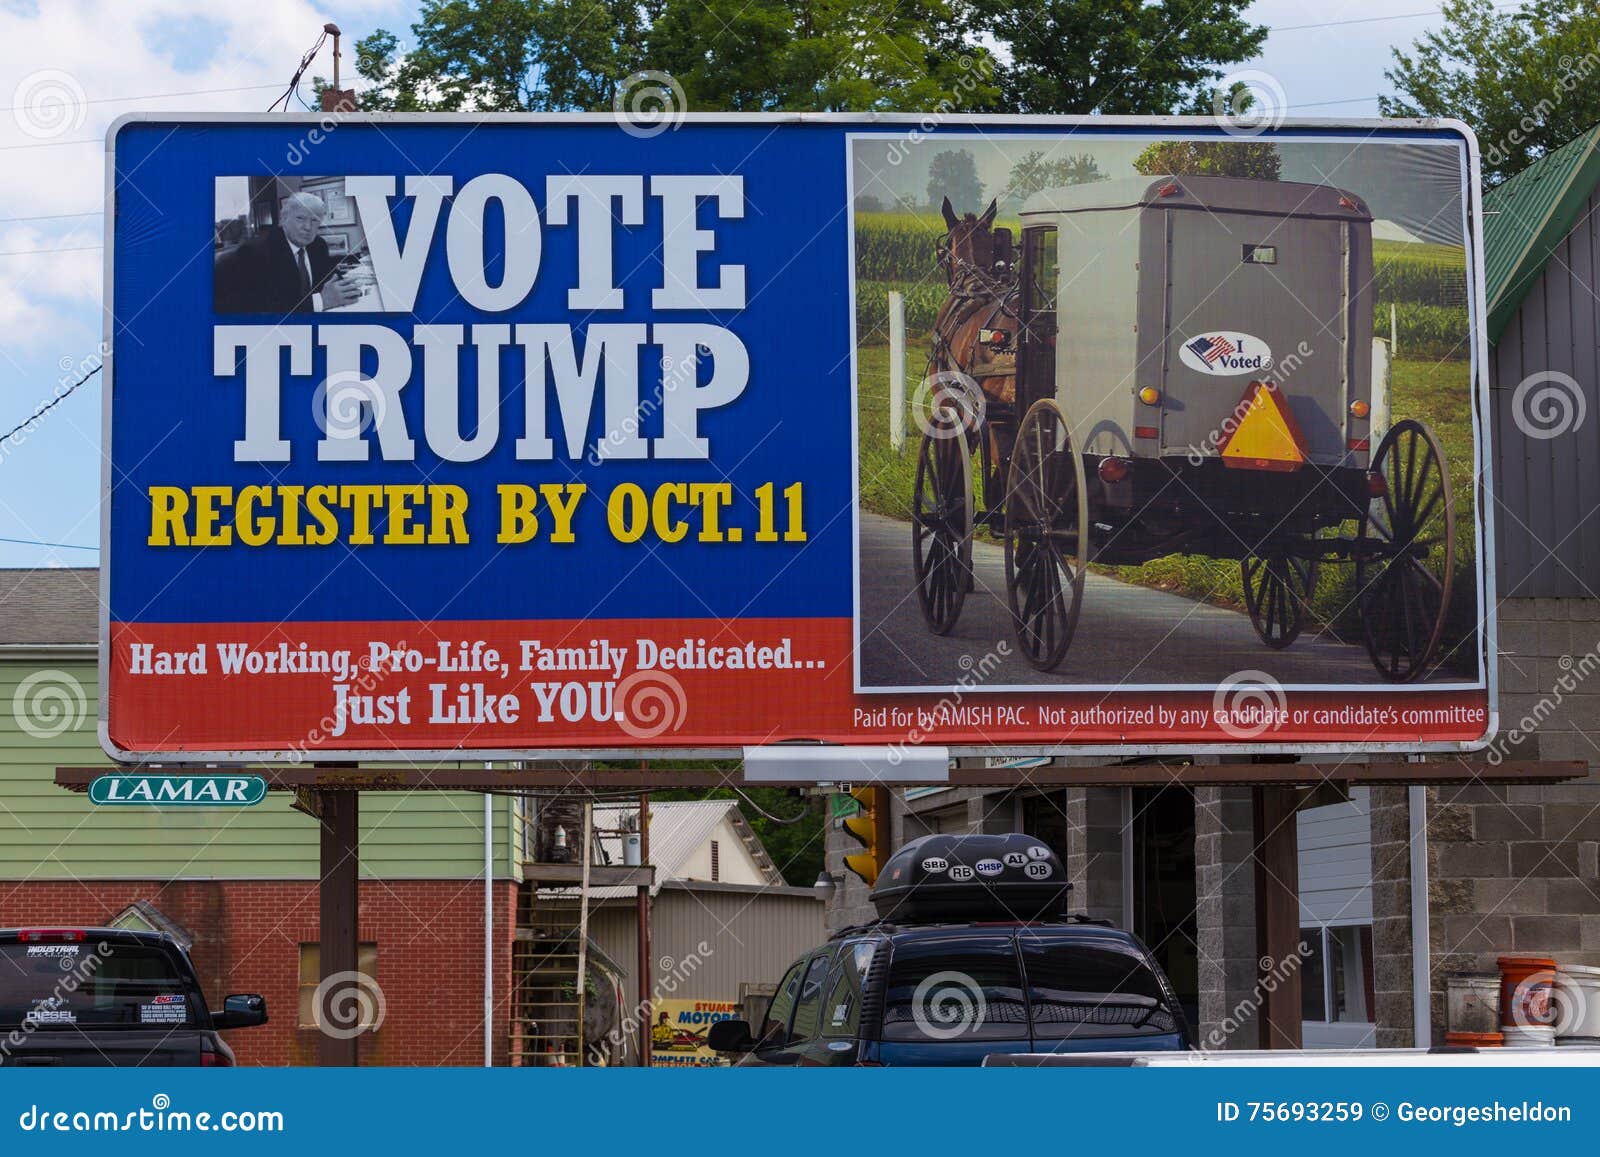 https://thumbs.dreamstime.com/z/amish-billboard-vote-trump-quarryville-pa-august-large-lancaster-county-seeks-to-register-voters-to-support-donald-75693259.jpg